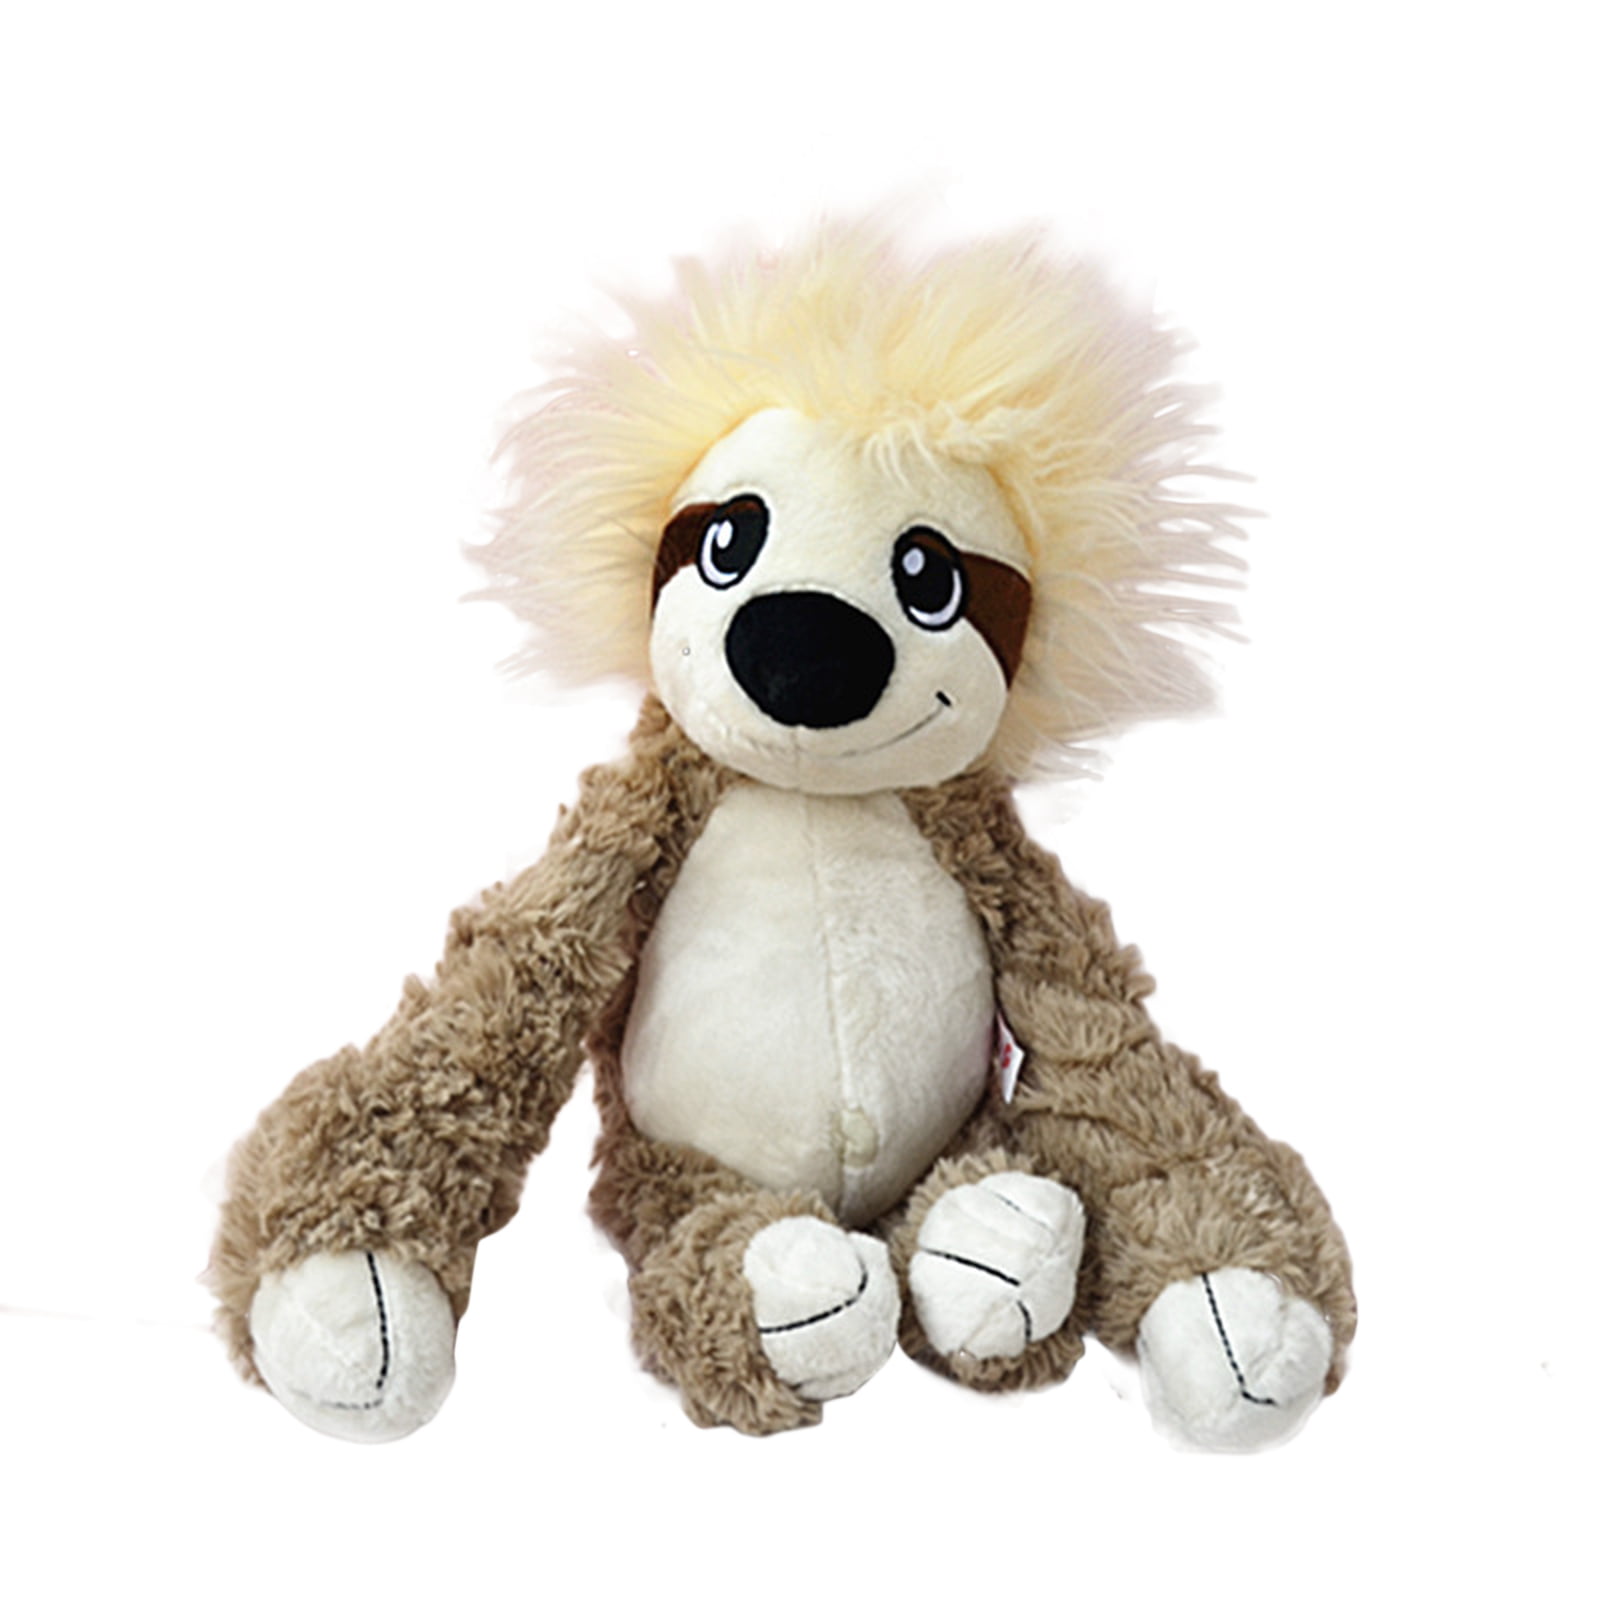 Sloth Stuffed Animal, 14 Inch Sloth Plushie, Super Fluffy Stuffed Sloth,  Cute Sloth Plush Toy Sloth Gifts for Kids Adults 